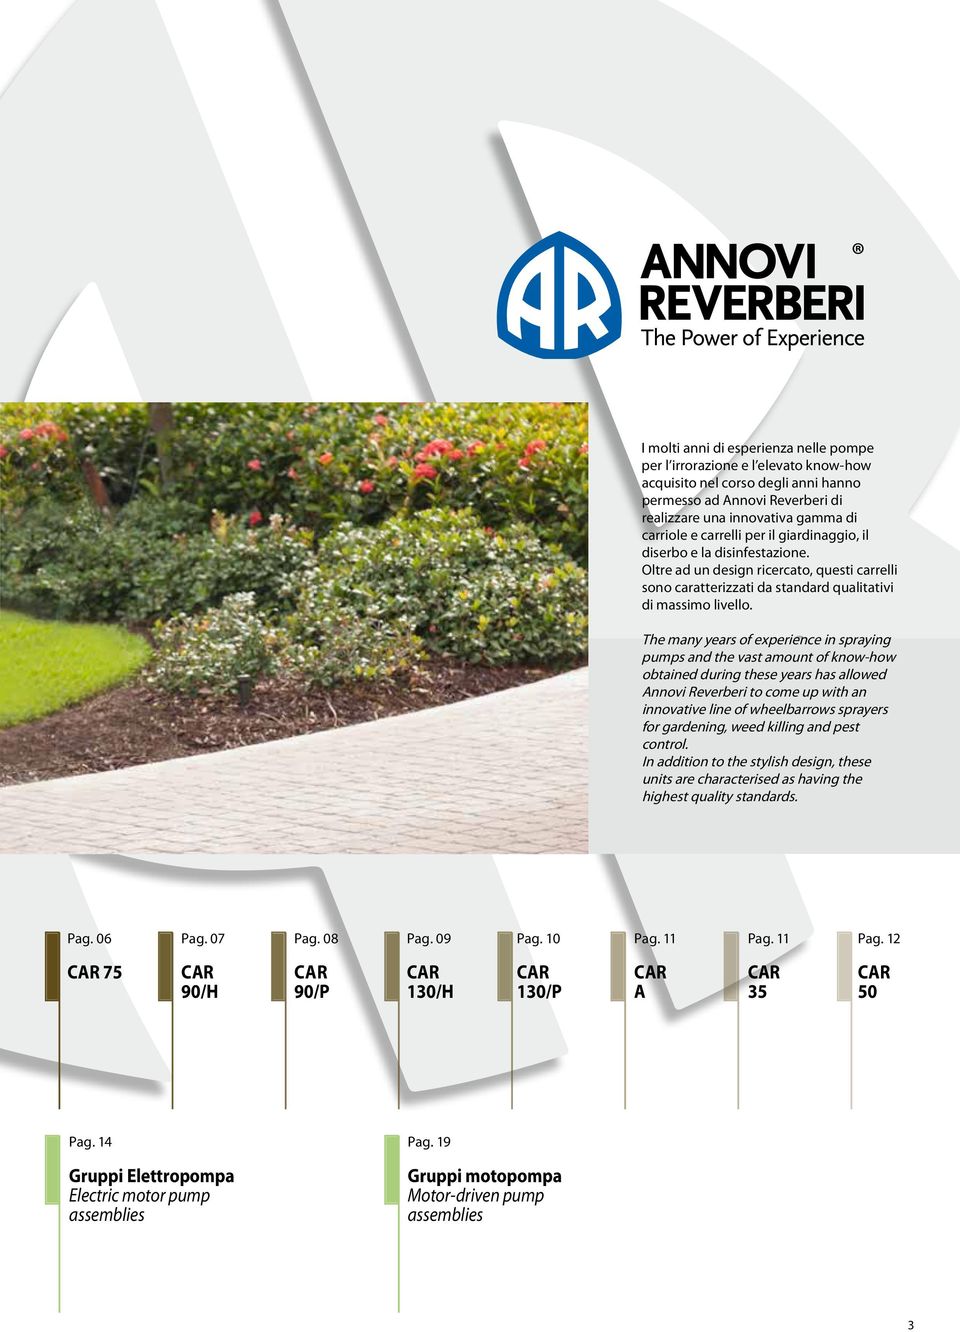 The many years of experience in spraying pumps and the vast amount of know-how obtained during these years has allowed Annovi Reverberi to come up with an innovative line of wheelbarrows sprayers for